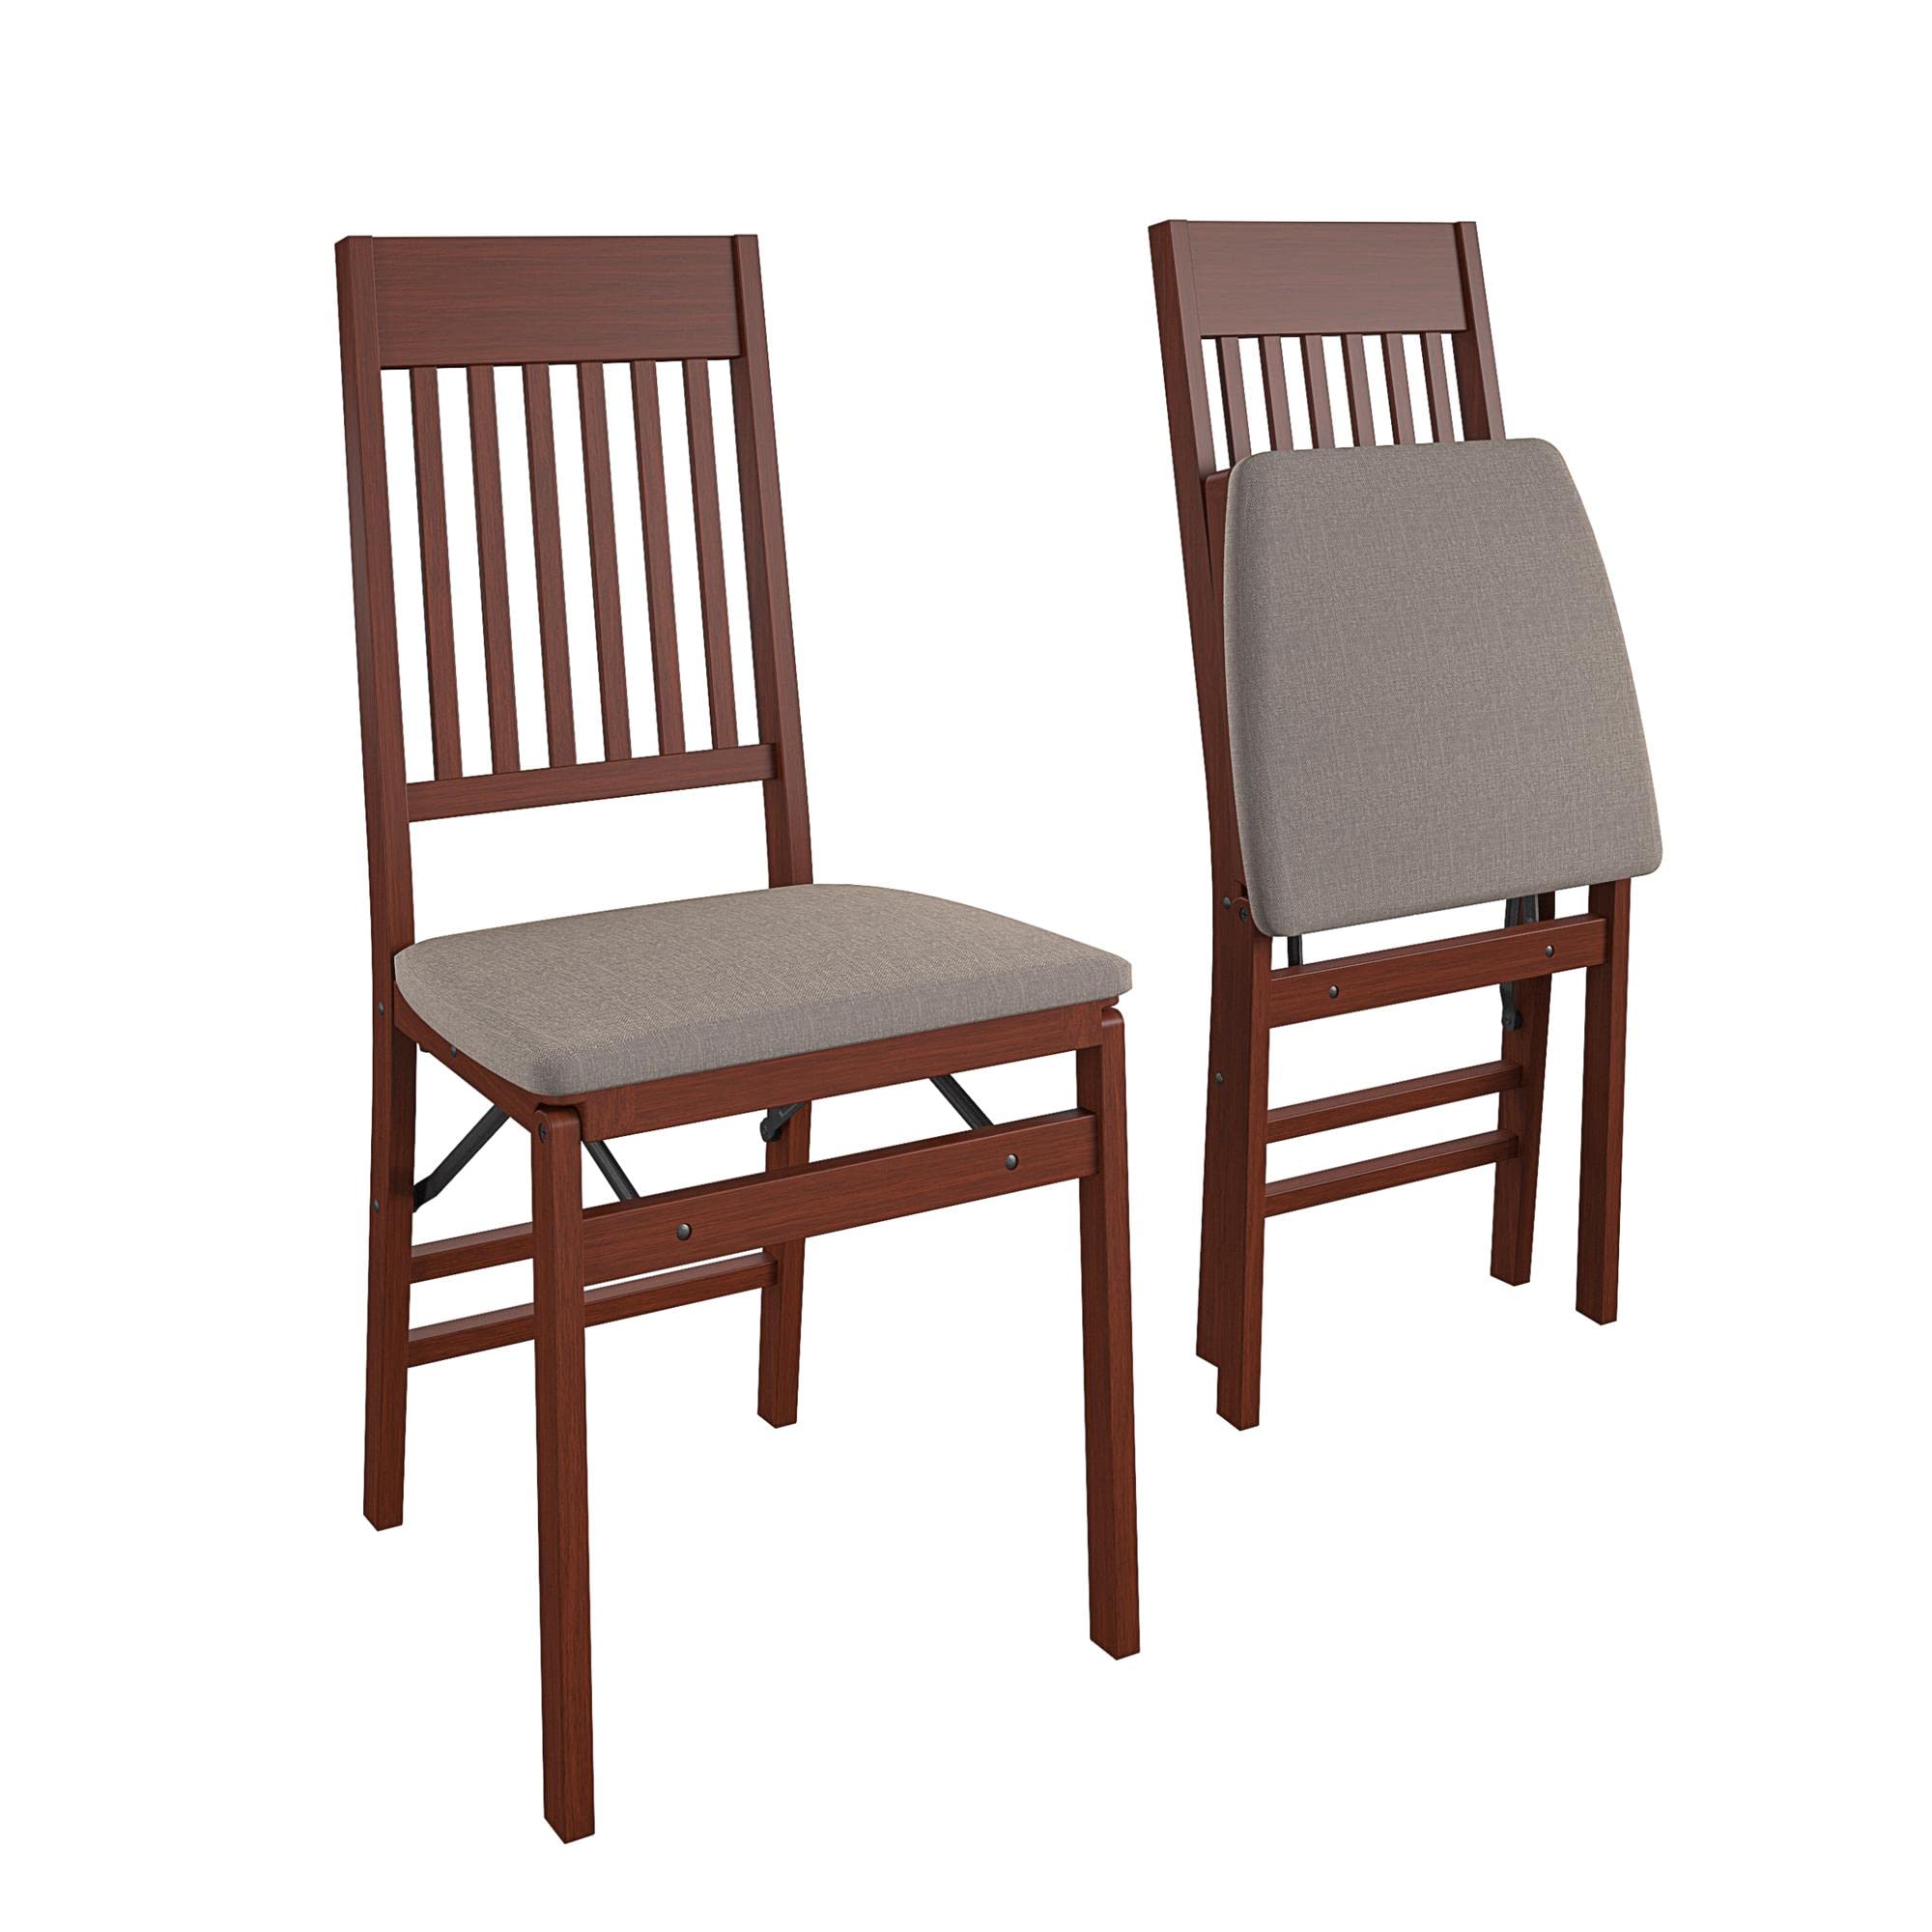 CoscoProducts cOScO Mission Back Solid Wood Folding chair with Thick Fabric Padded, Walnut, 2-Pack, Triple Braced with Locking Mechanism, for 